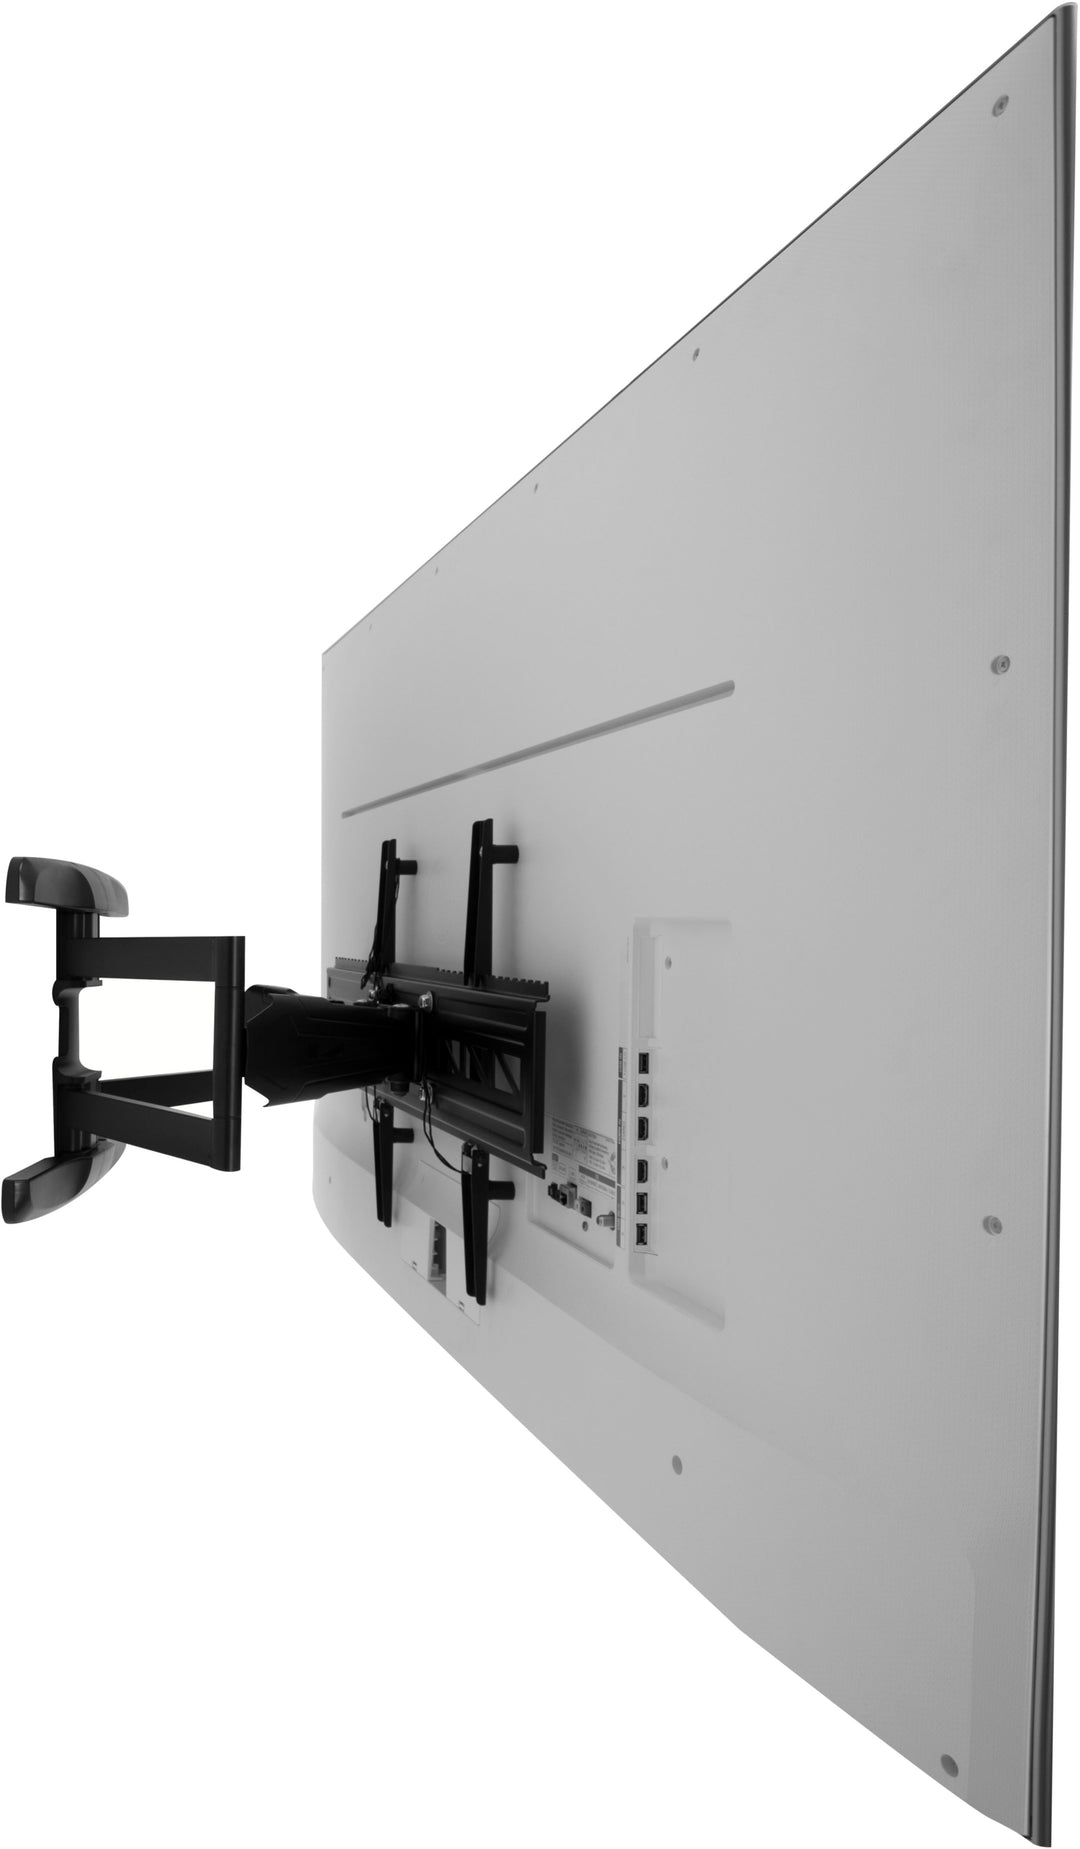 Insignia™ - Full-Motion Wall Mount for 47" - 90" TVs up to 130 lbs. - Extends 25.2” - Black_10